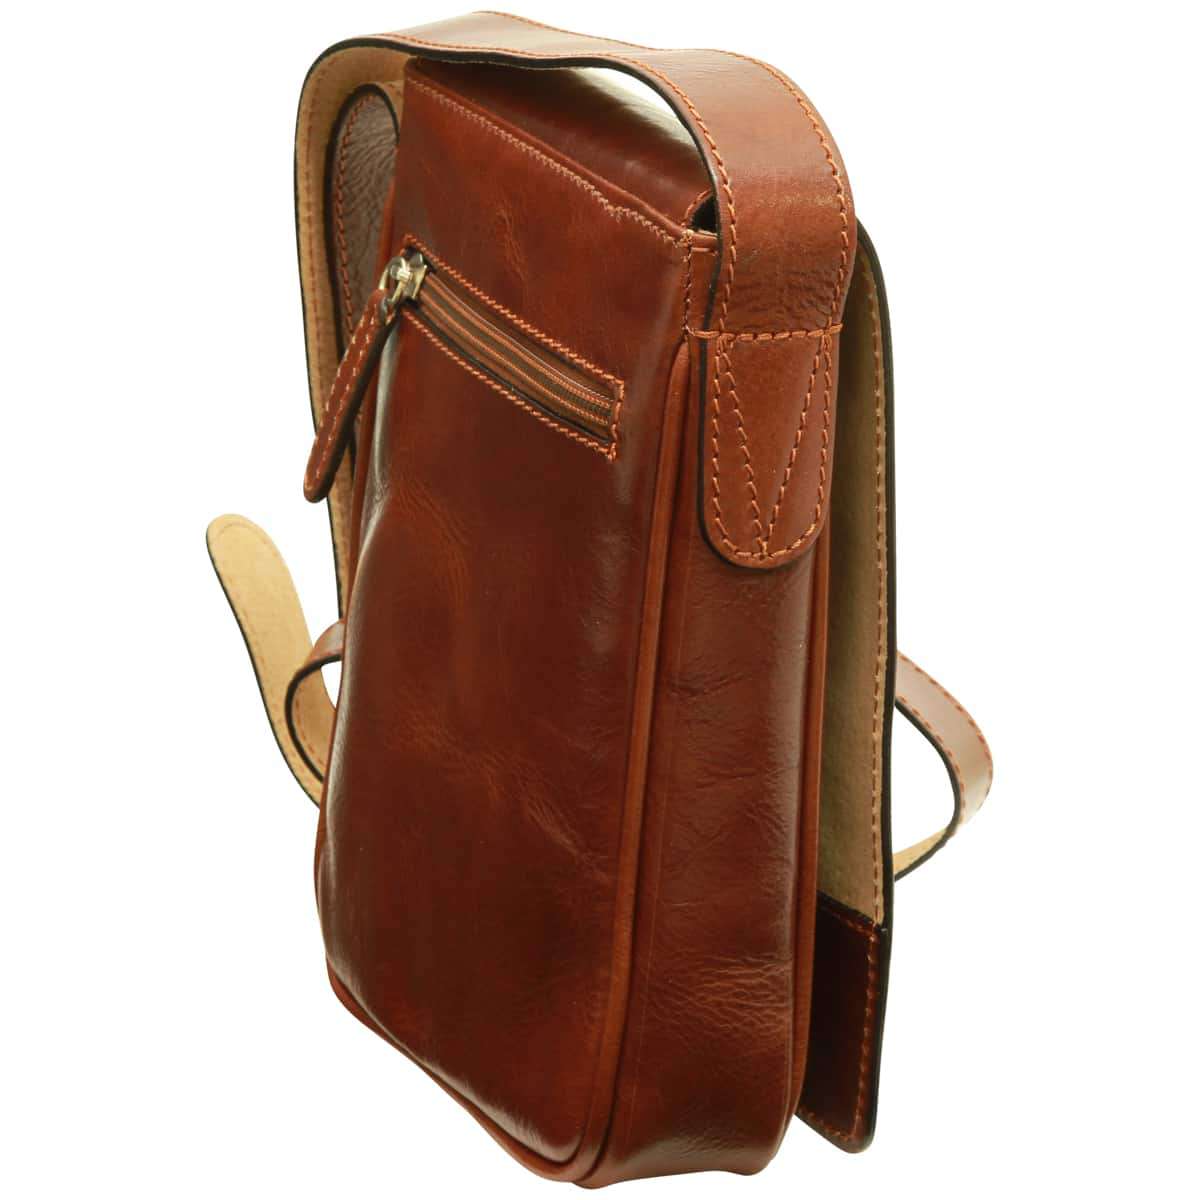 Cowhide leather cross body bag - Brown | 070805MA | EURO | Old Angler Firenze